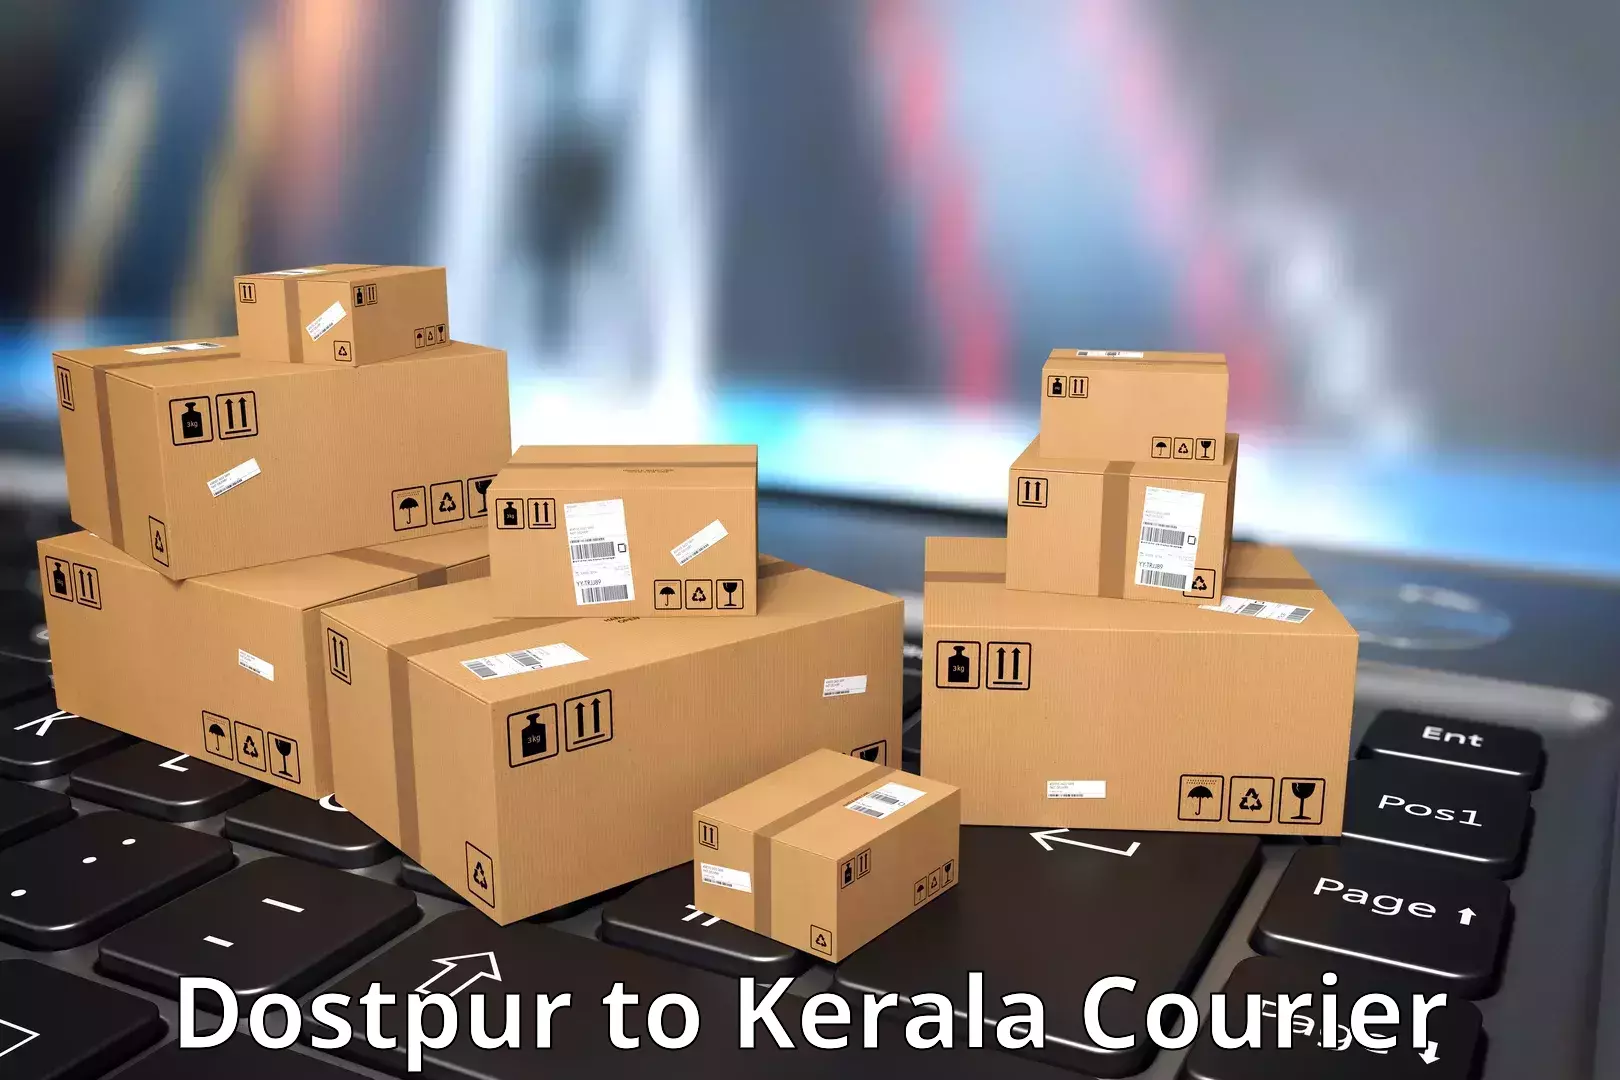 Affordable parcel service Dostpur to Cochin Port Kochi